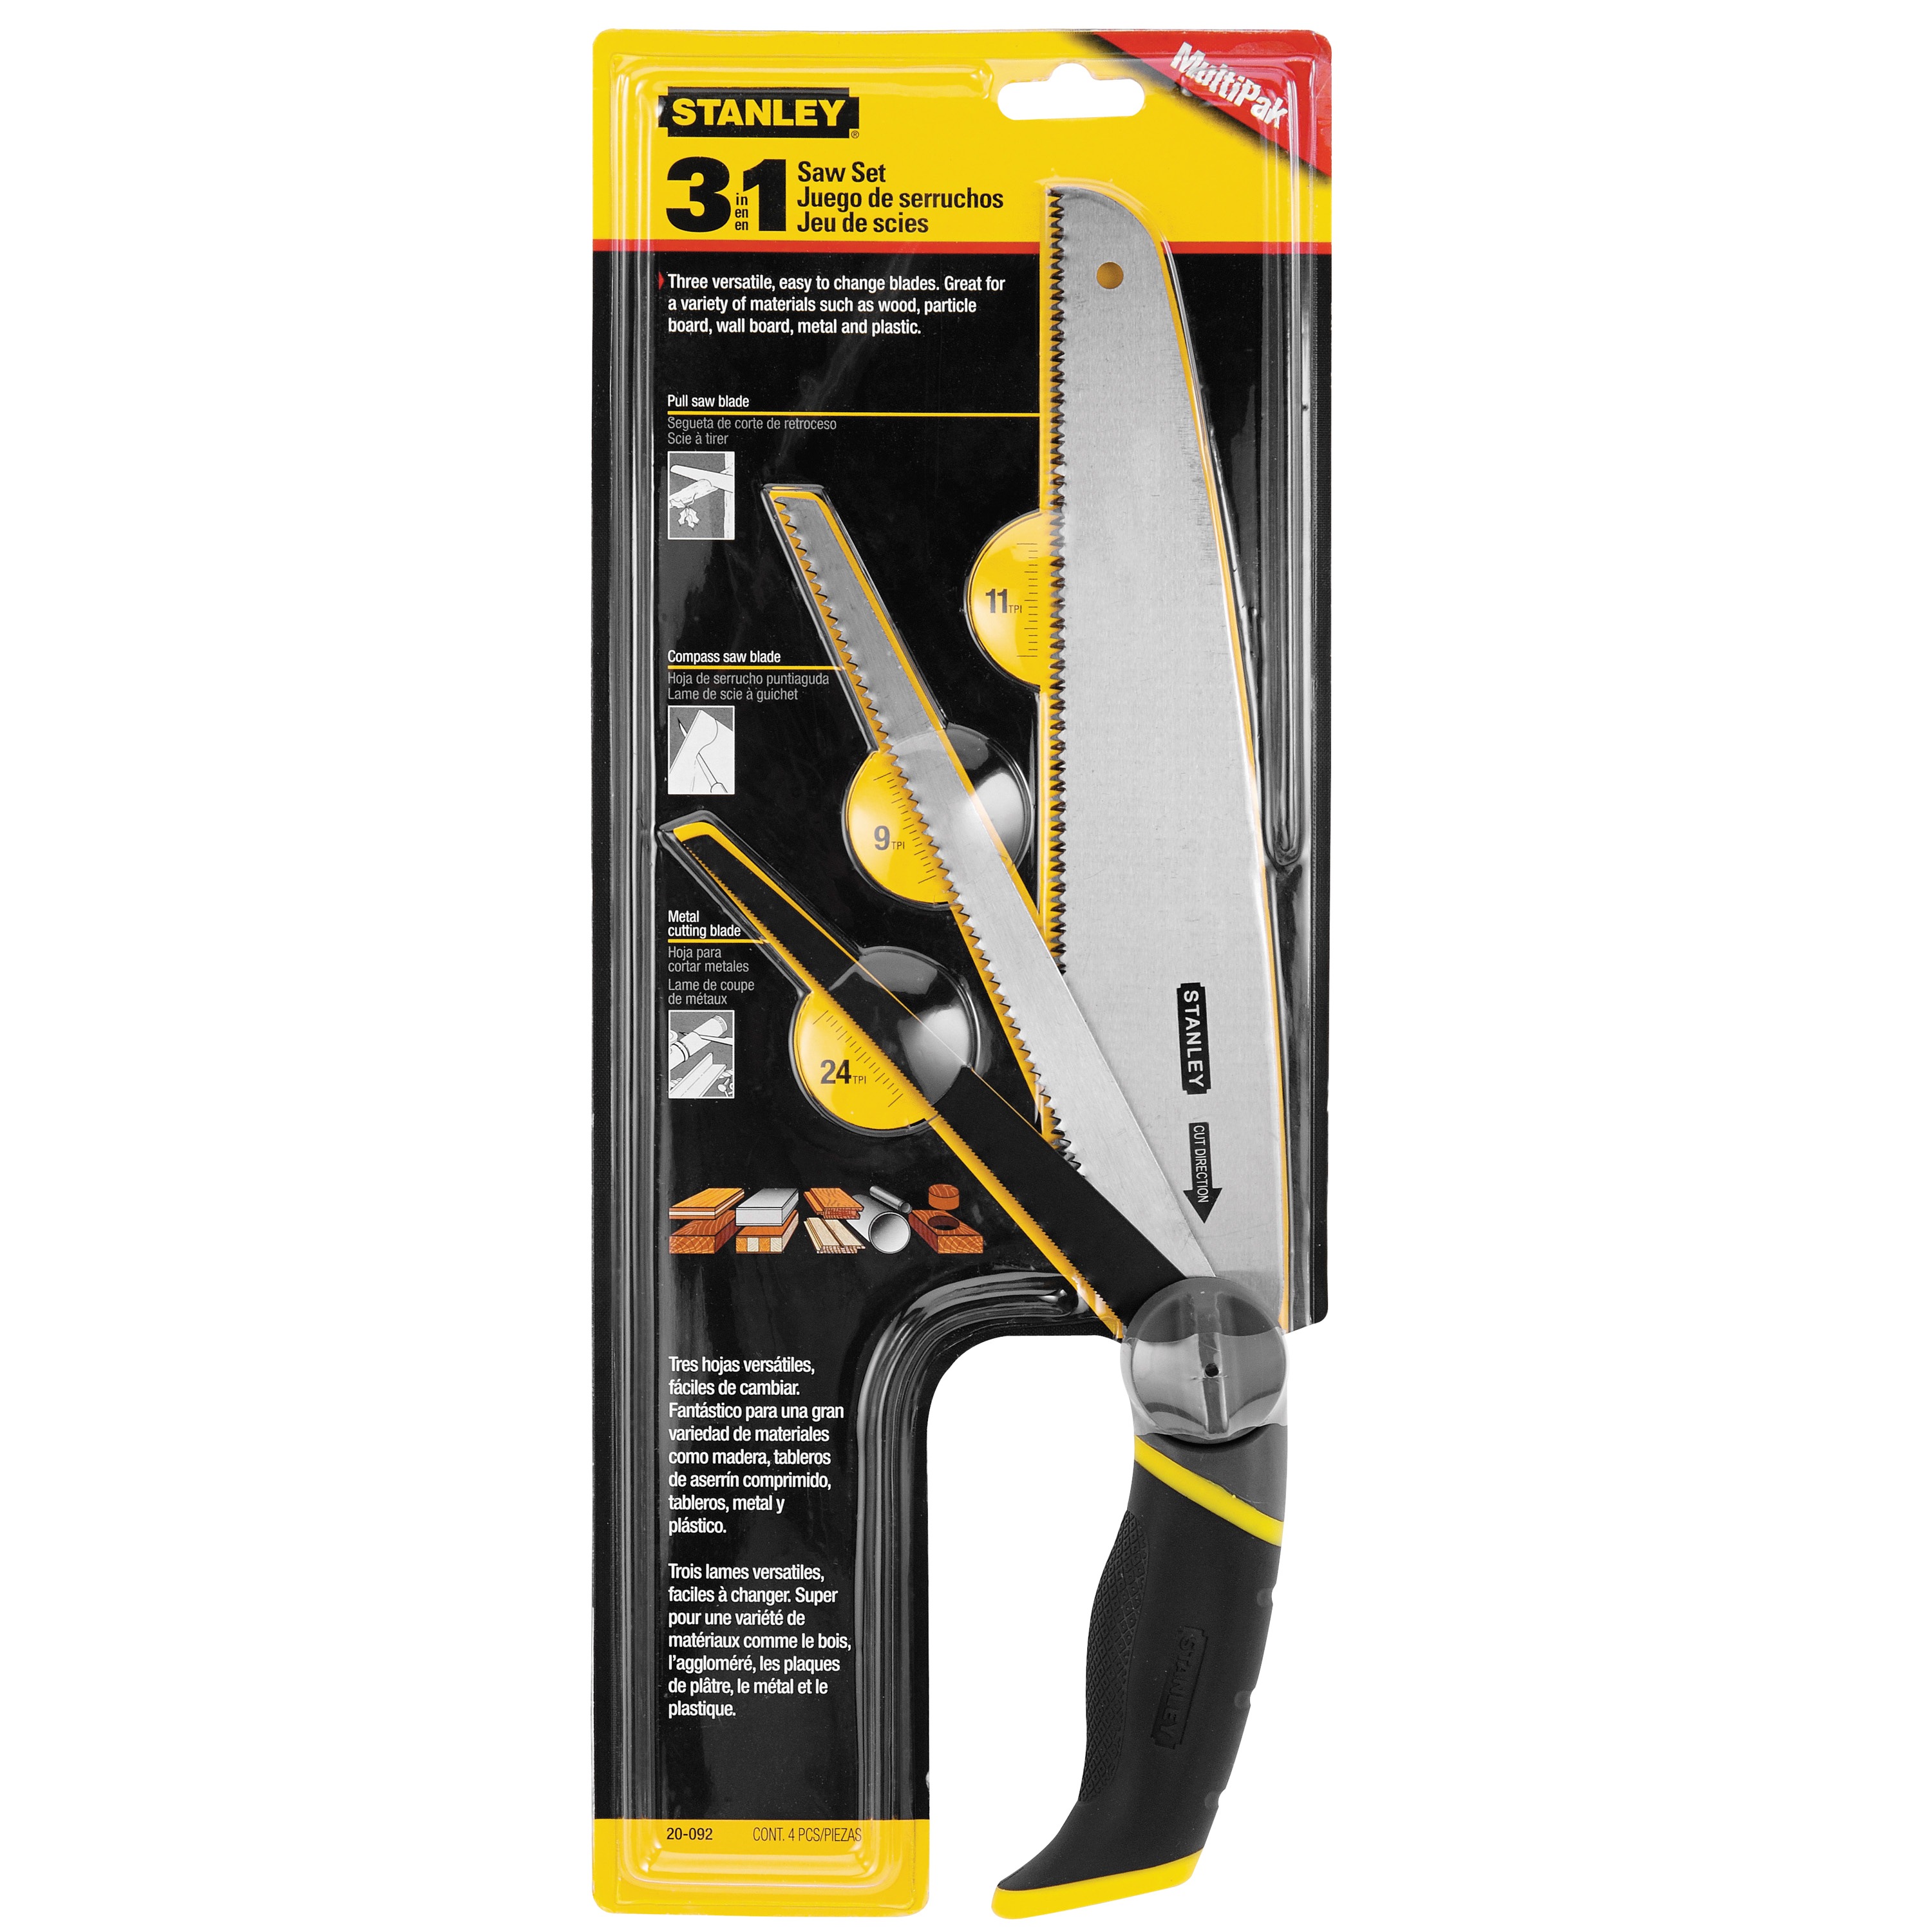 Stanley Tools - 3 in 1 Saw Set - 20-092